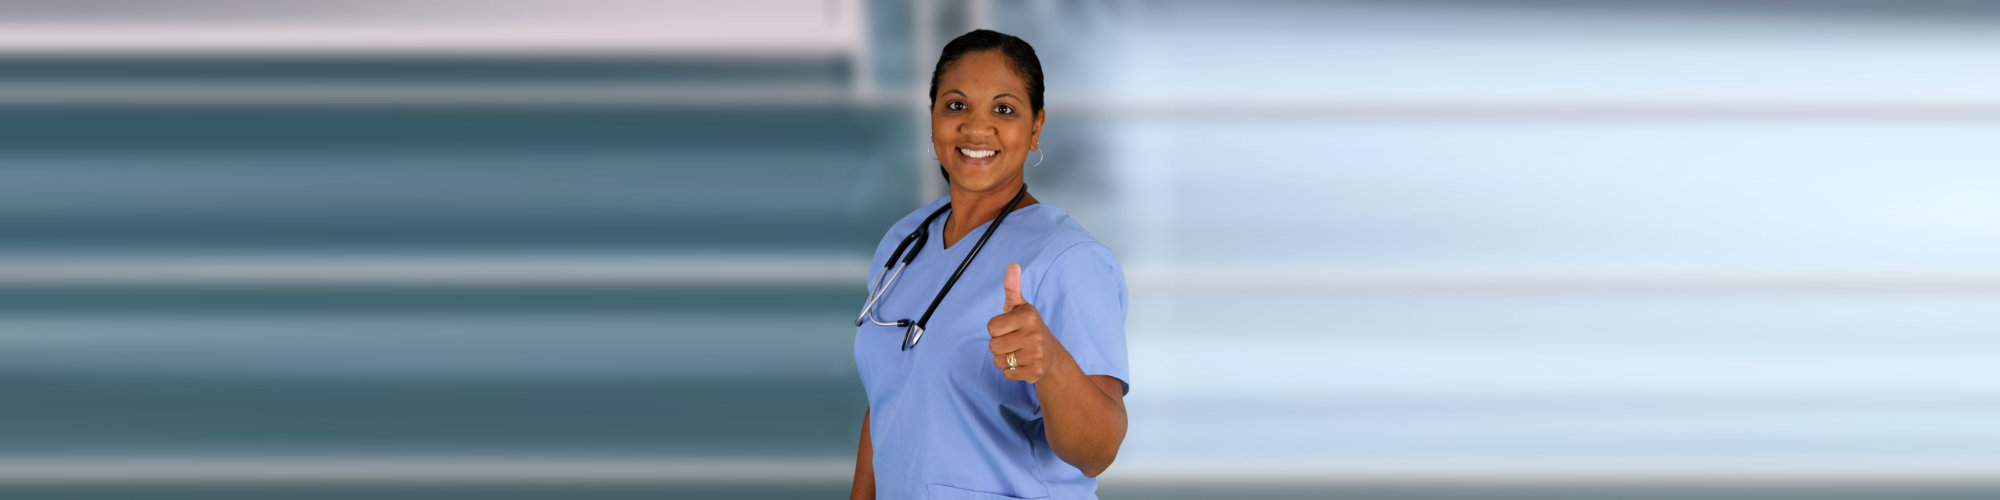 Minority nurse working at her job in a hospital